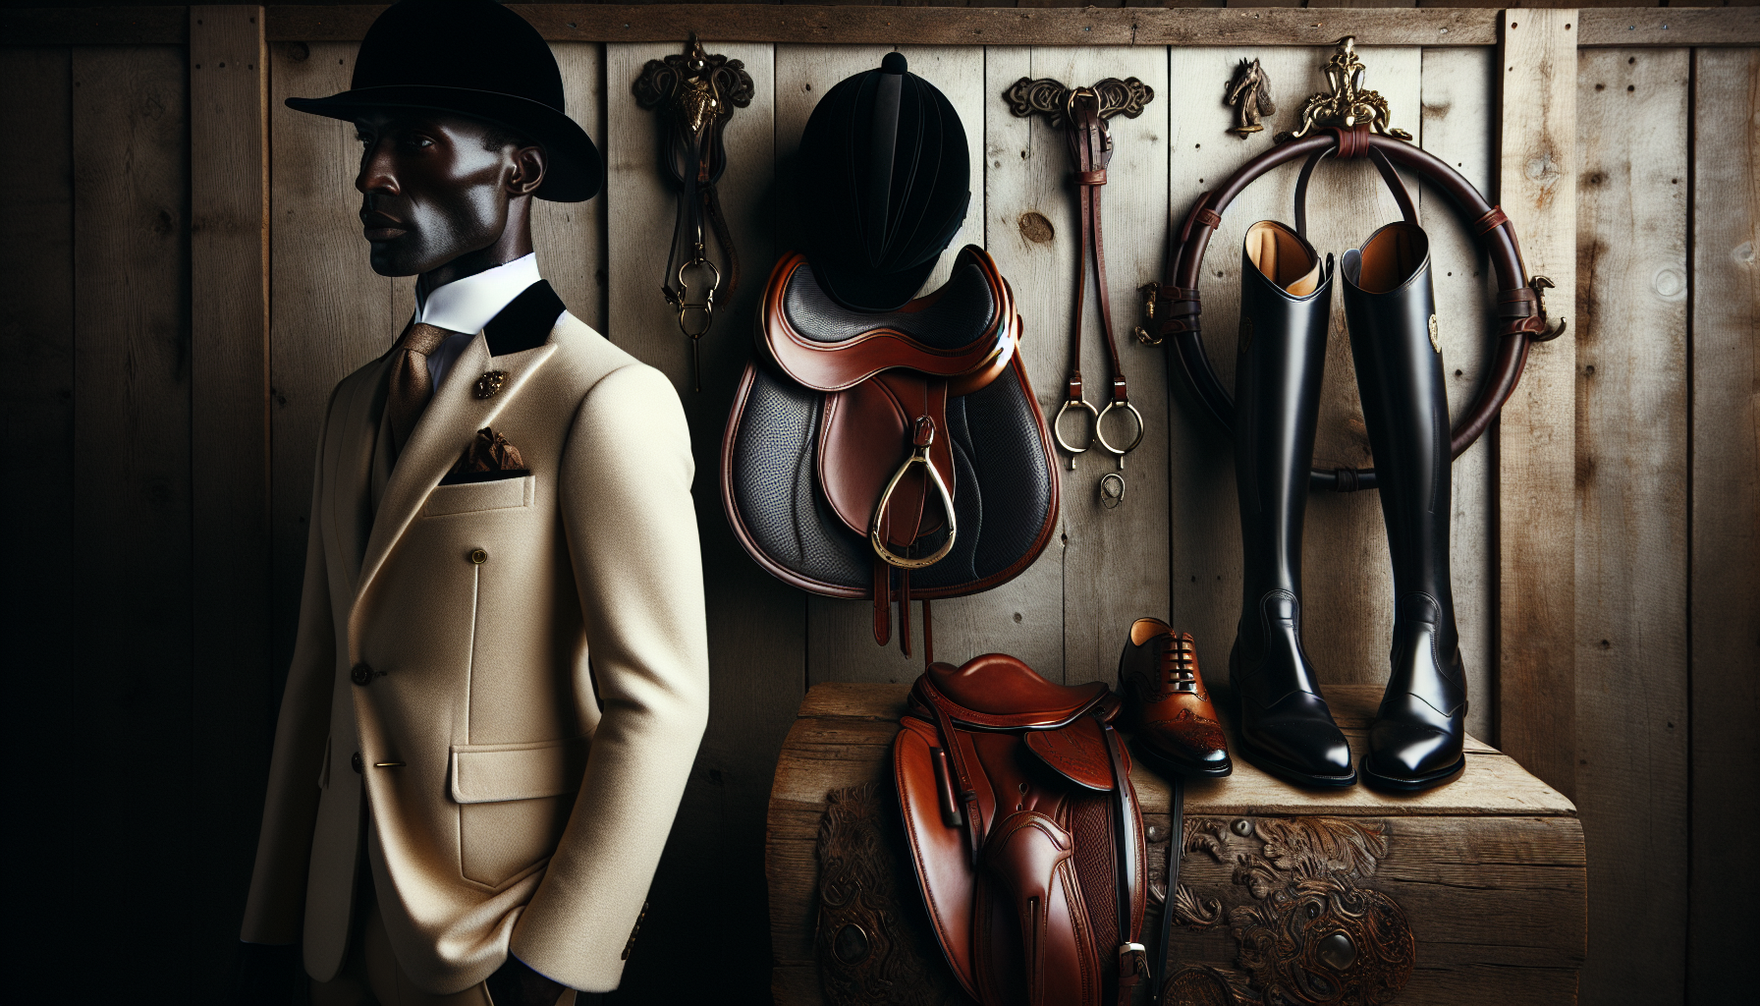 A scene portraying chic equestrian essentials, combining both tradition and modern sophistication. A middle-aged Black male in a finely tailored riding ensemble, complete with a cream-colored riding j